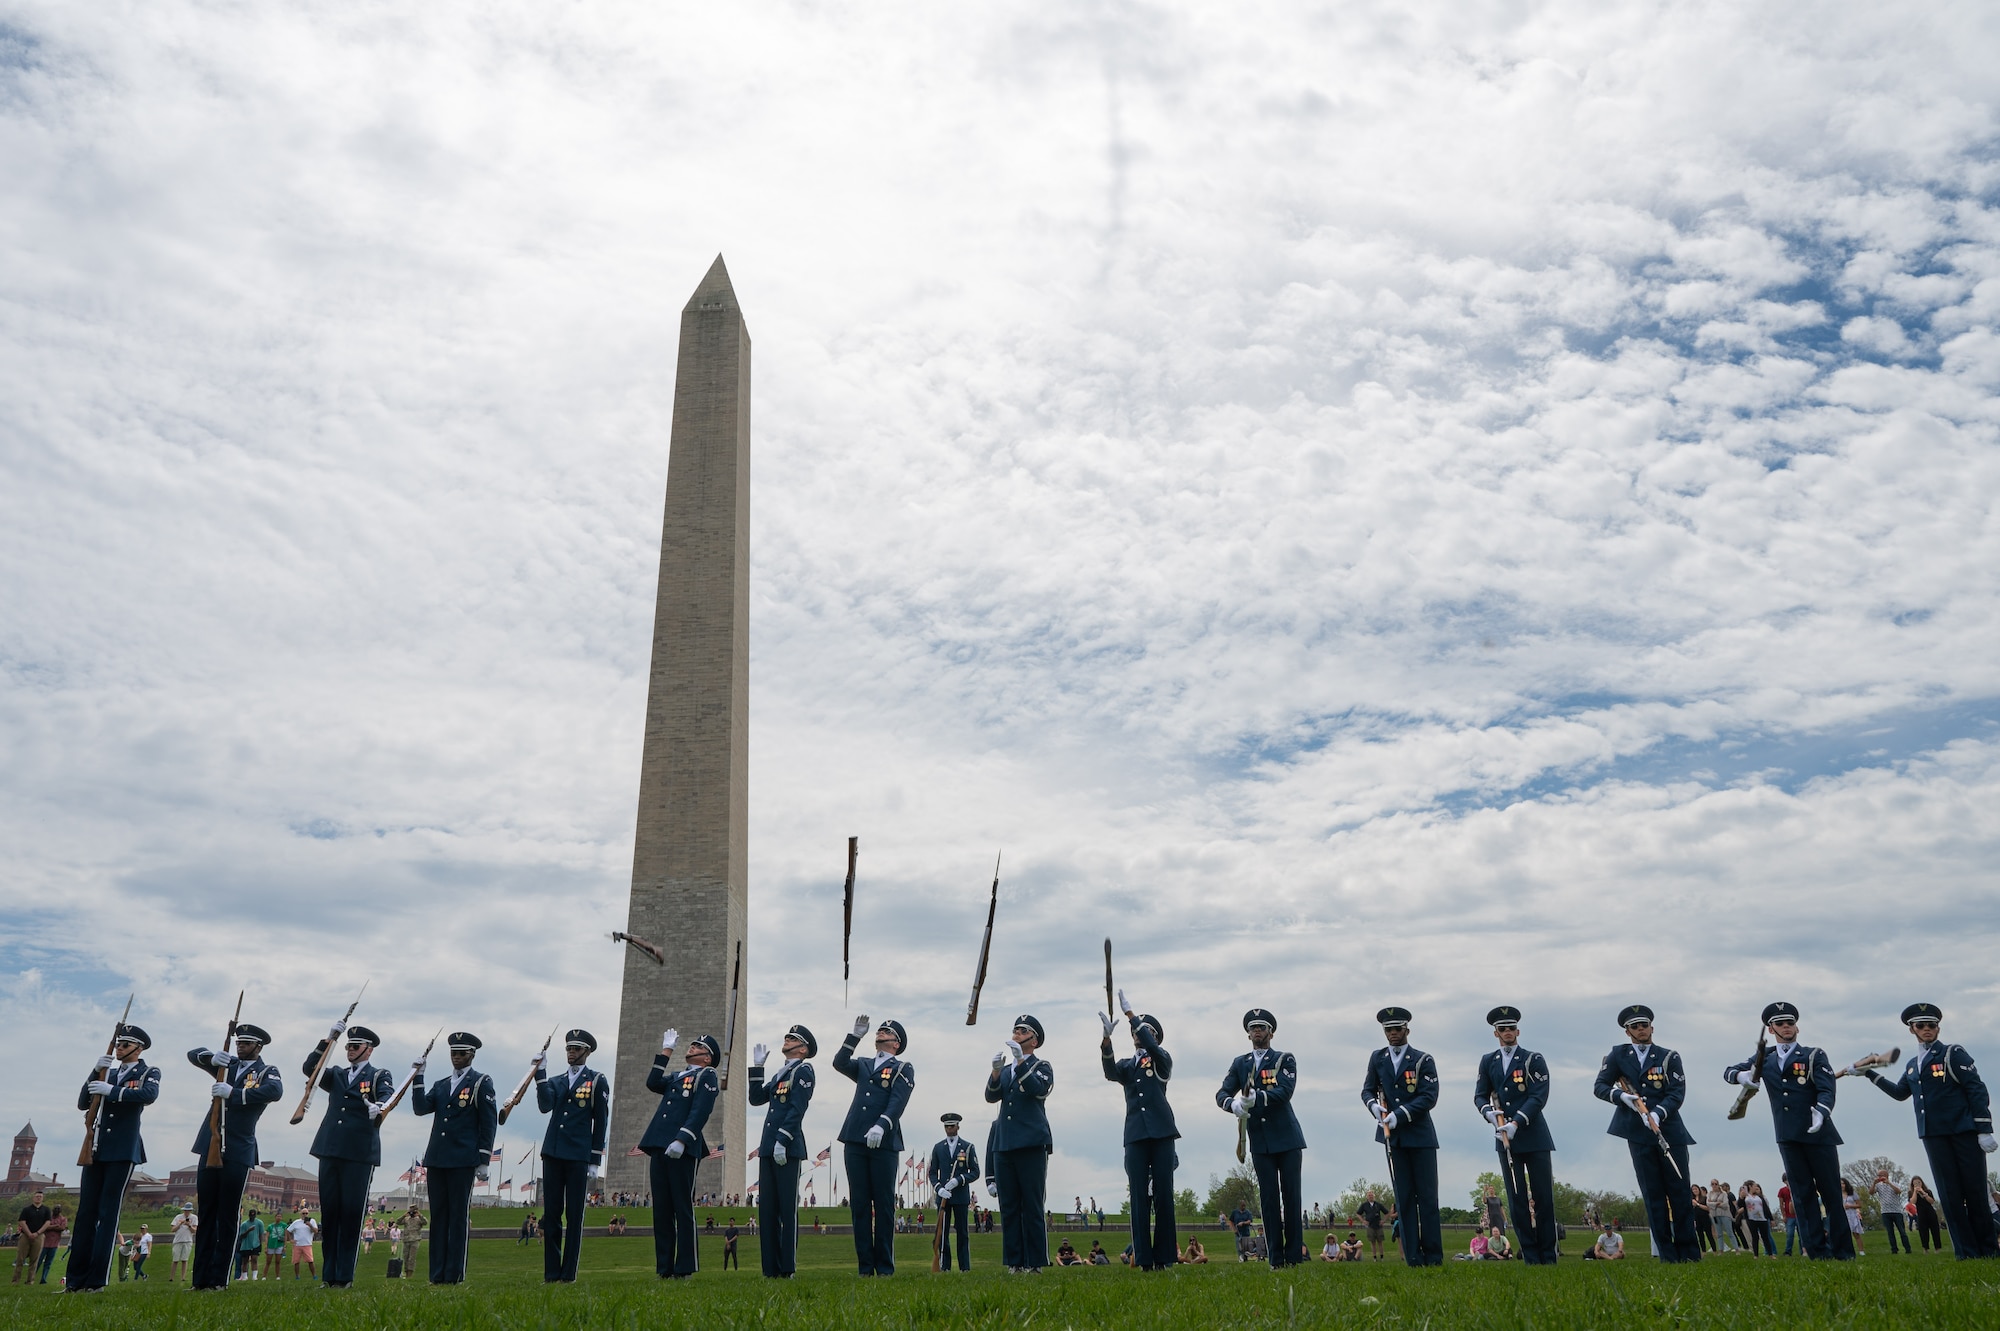 The United States Air Force Honor Guard Drill Team performs their routine during the Joint Services Drill Exhibition, April 14, 2023, at the Washington Monument, Washington, D.C. The Honor Guard Drill Team’s mission is to promote the Air Force mission by showcasing drill performances at public and military venues to recruit, retain and inspire Airmen. (U.S. Air Force photo by Airman 1st Class Bill Guilliam)